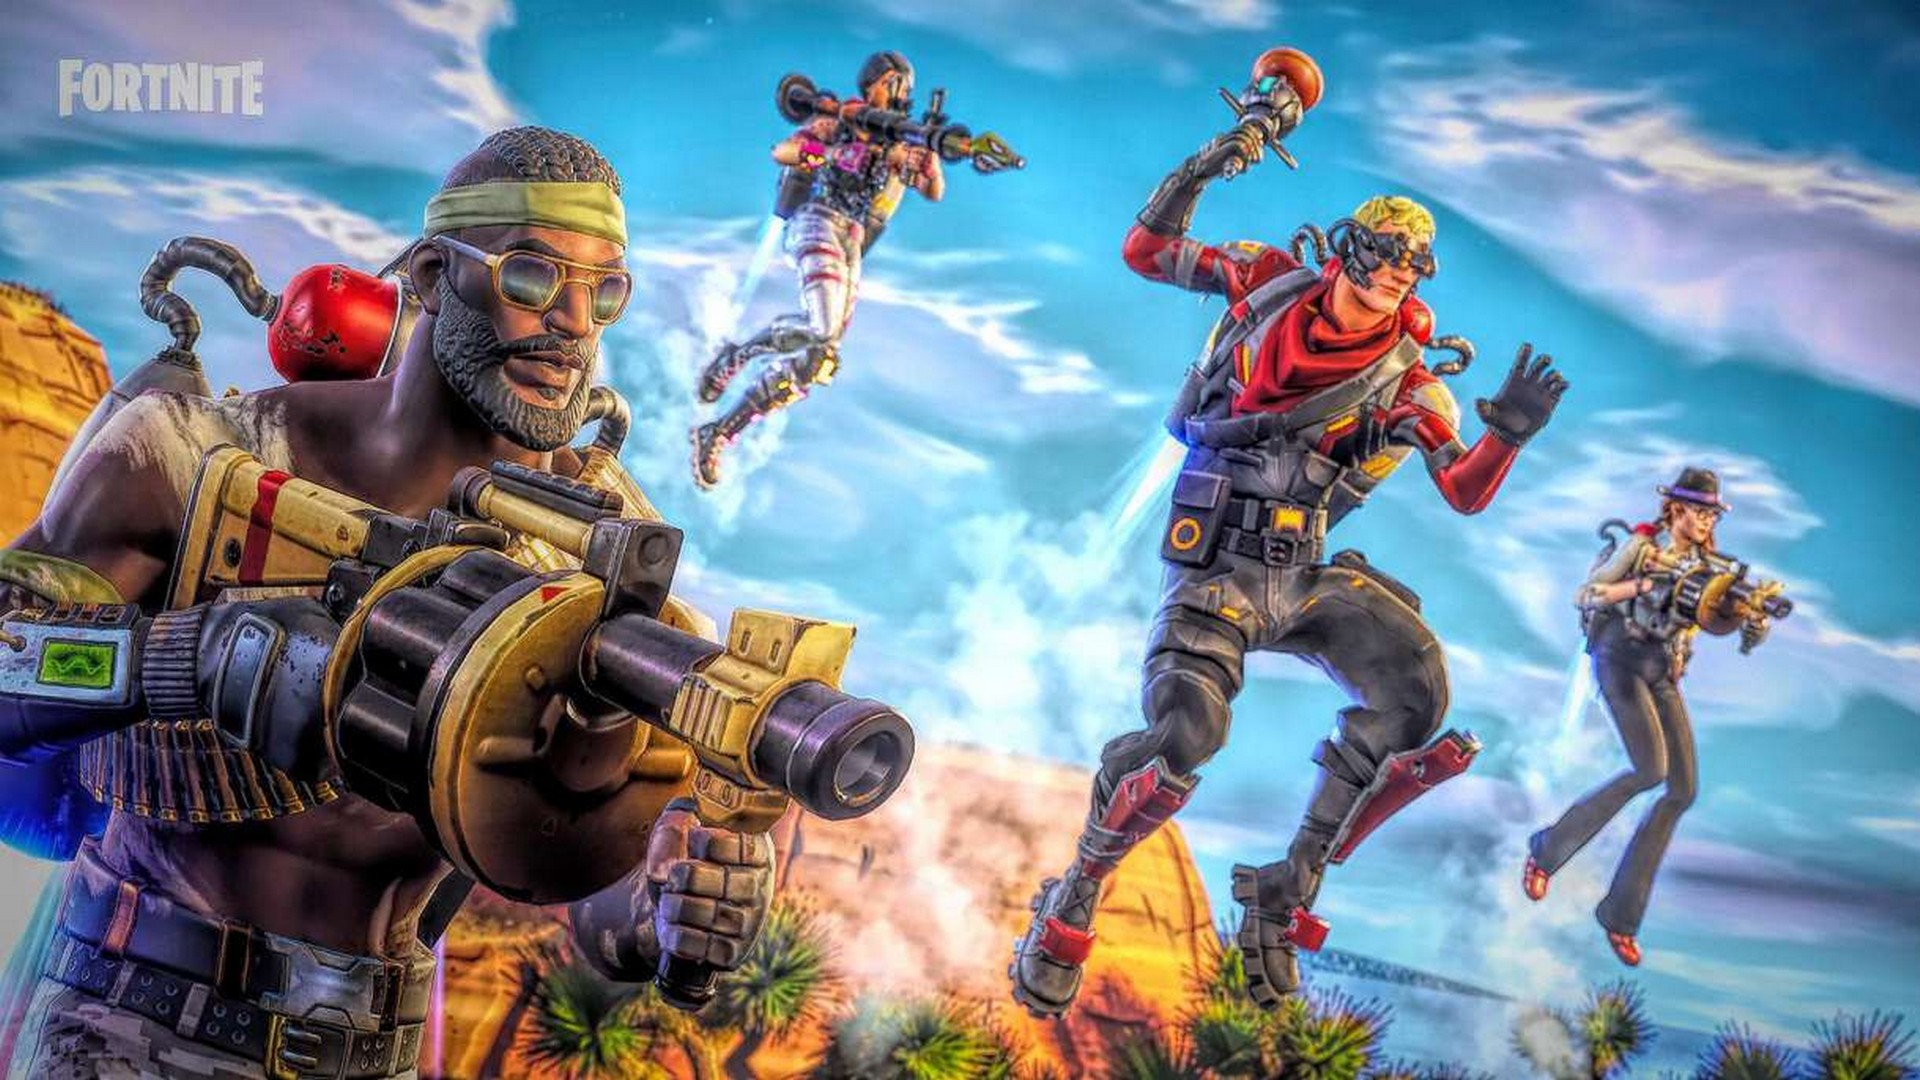 Fortnite Background Wallpaper HD With high-resolution 1920X1080 pixel. You can use this wallpaper for your Desktop Computer Backgrounds, Mac Wallpapers, Android Lock screen or iPhone Screensavers and another smartphone device